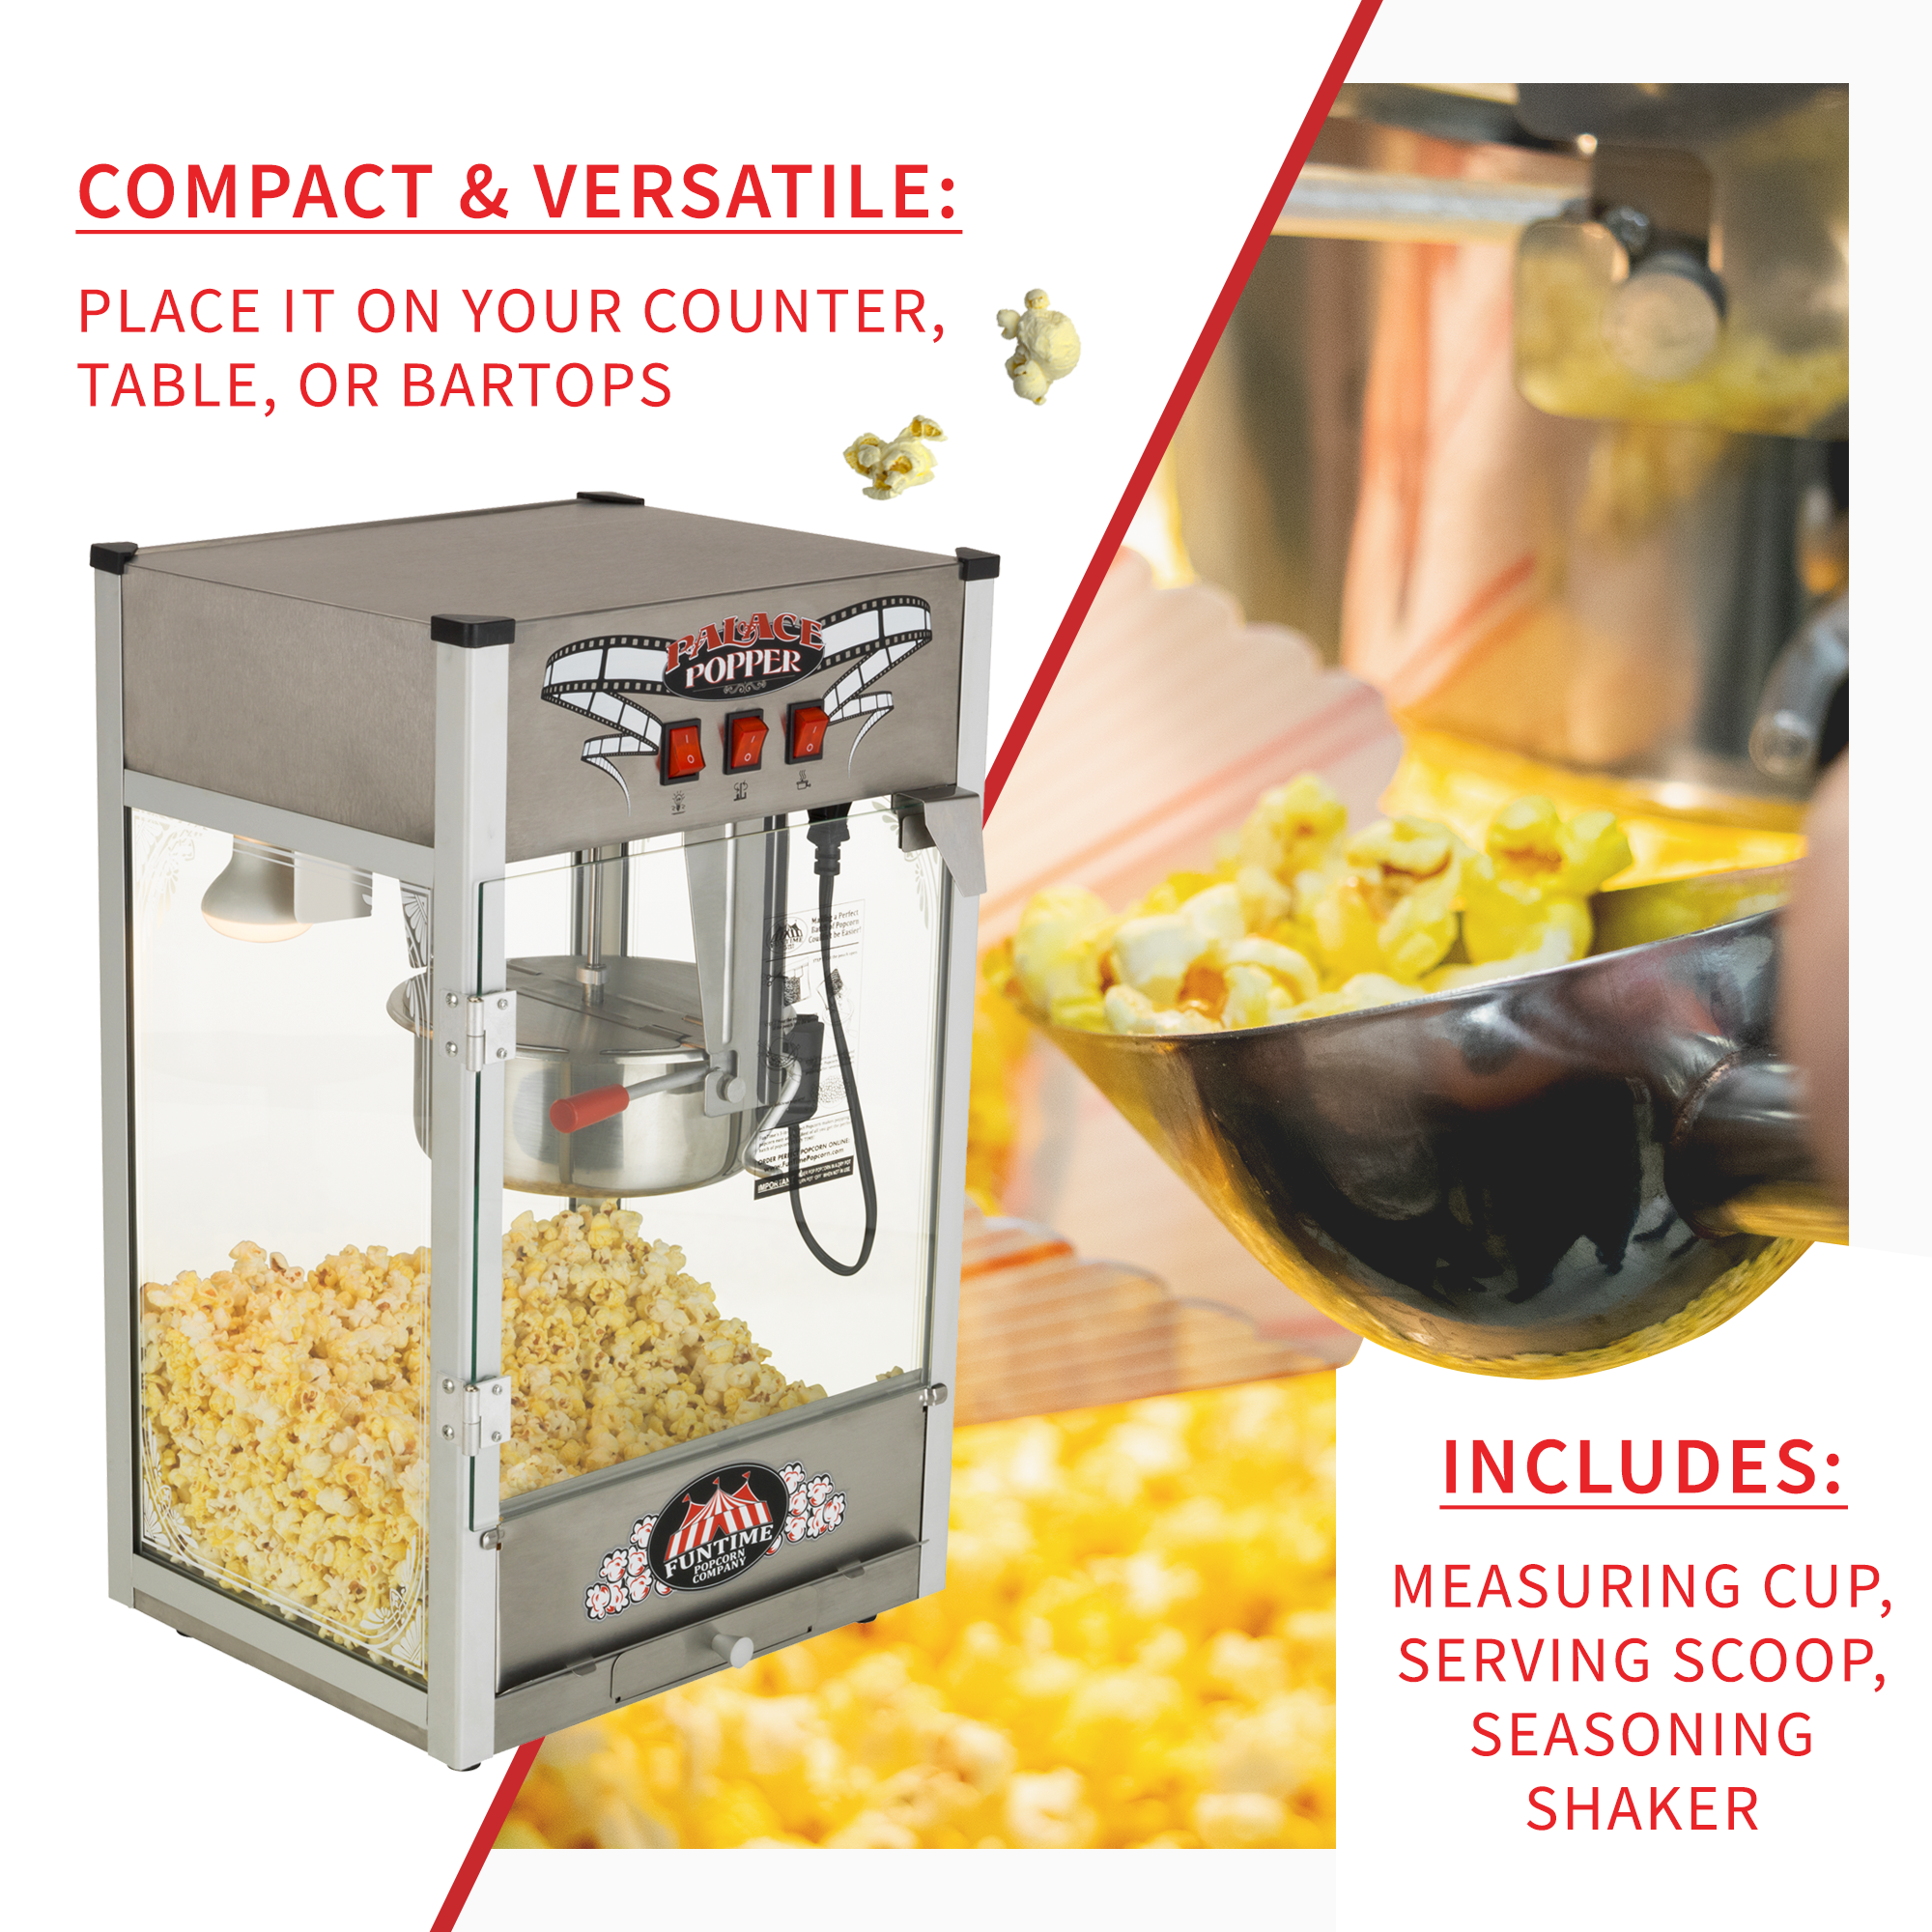 Funtime Palace Popper 8-Ounce Hot Oil Popcorn Machine